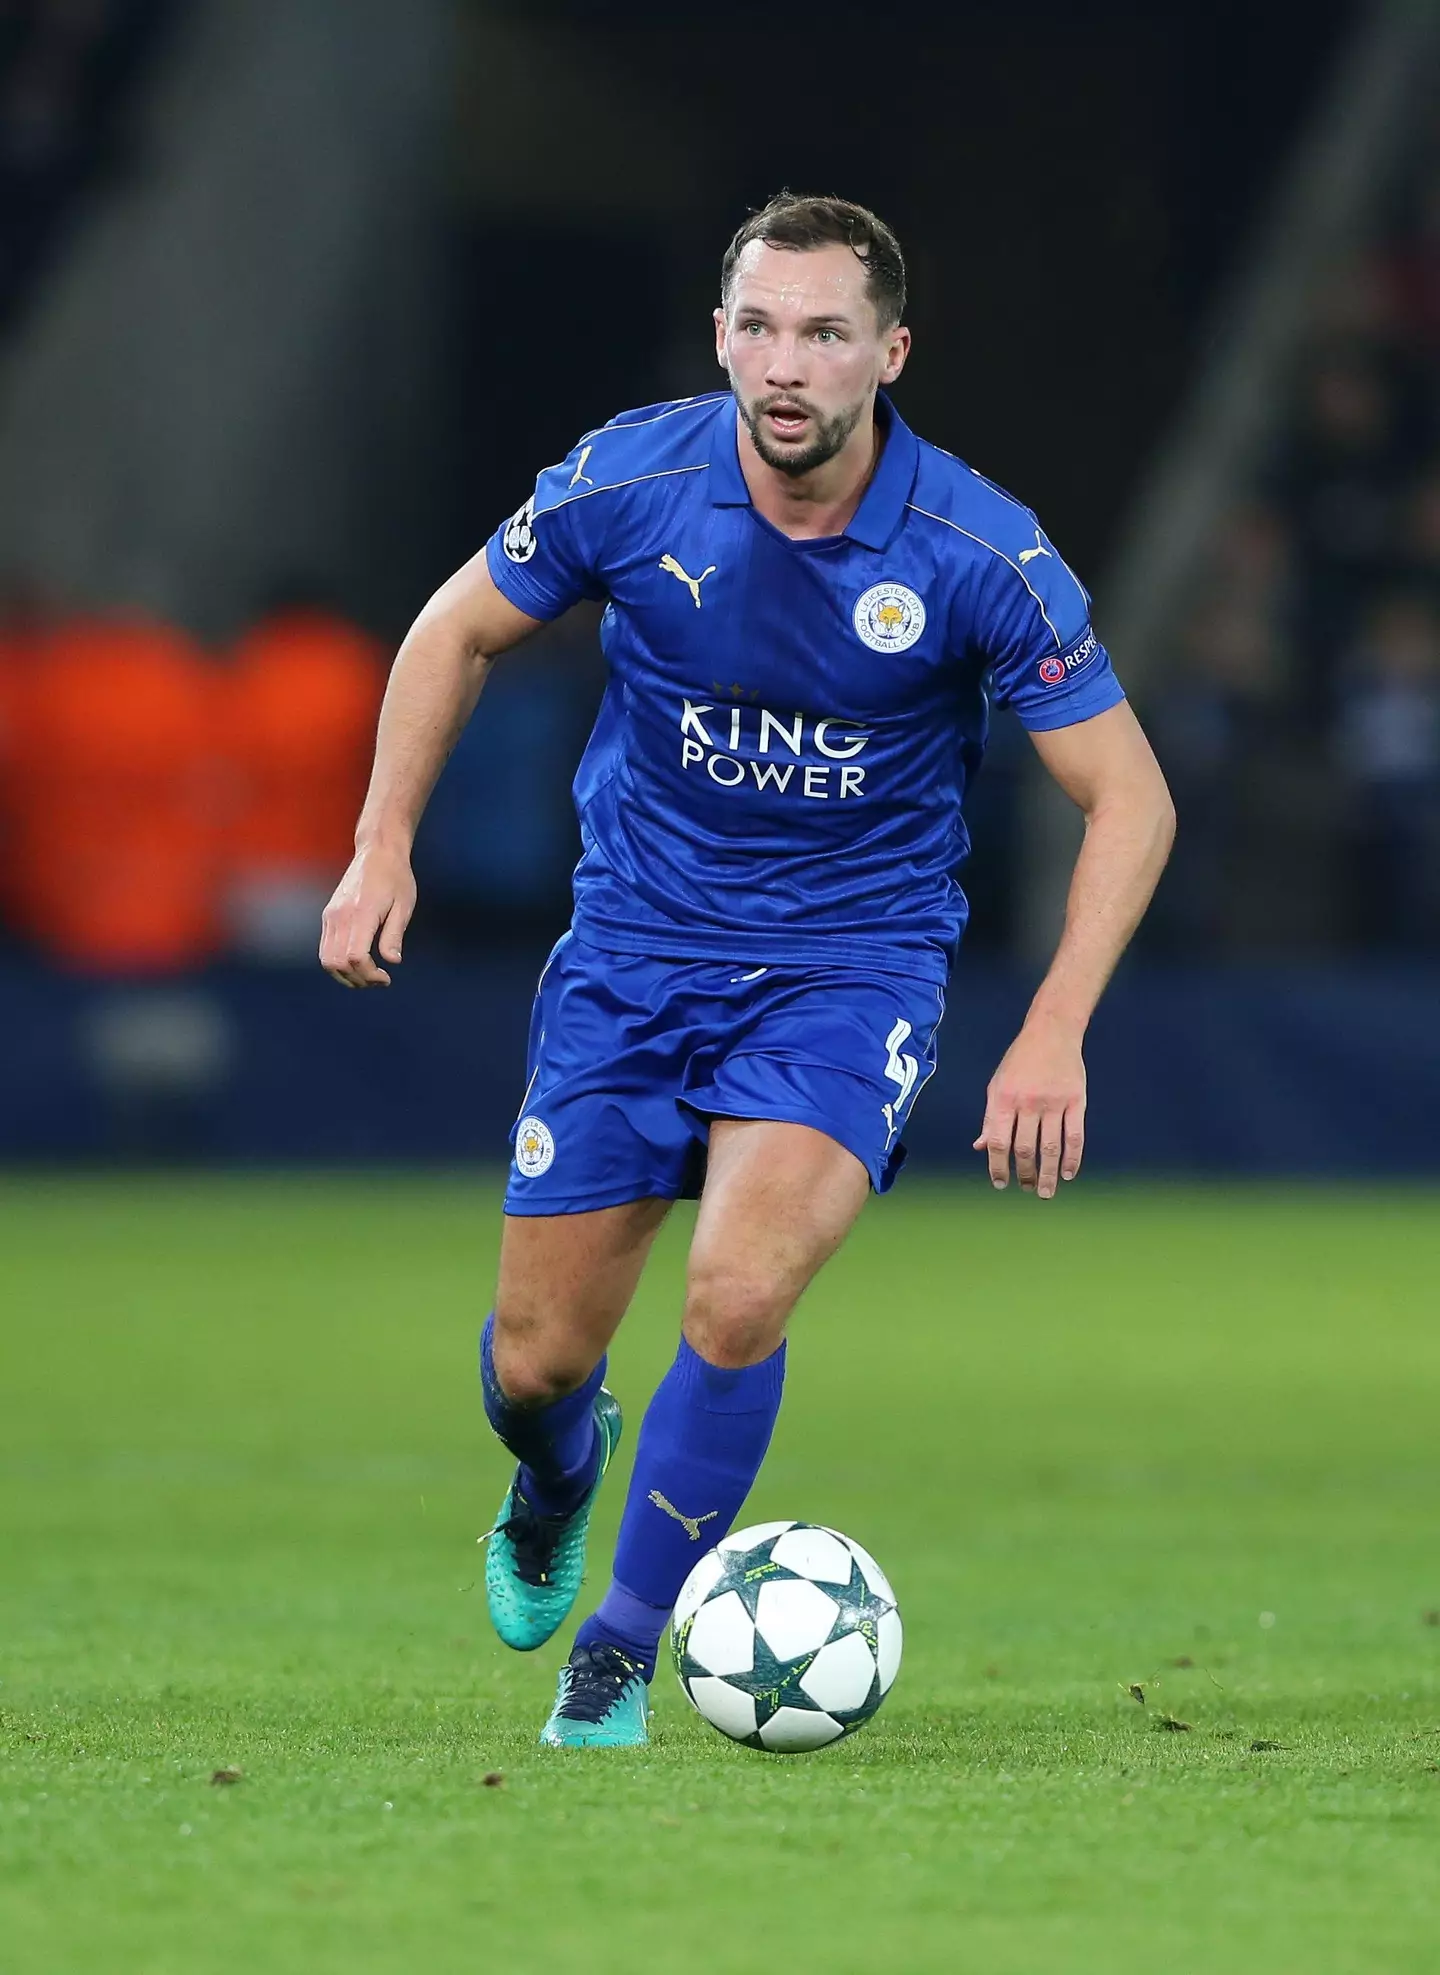 Former Leicester midfielder Danny Drinkwater was arrested for drink-driving in 2019 (Image: PA)